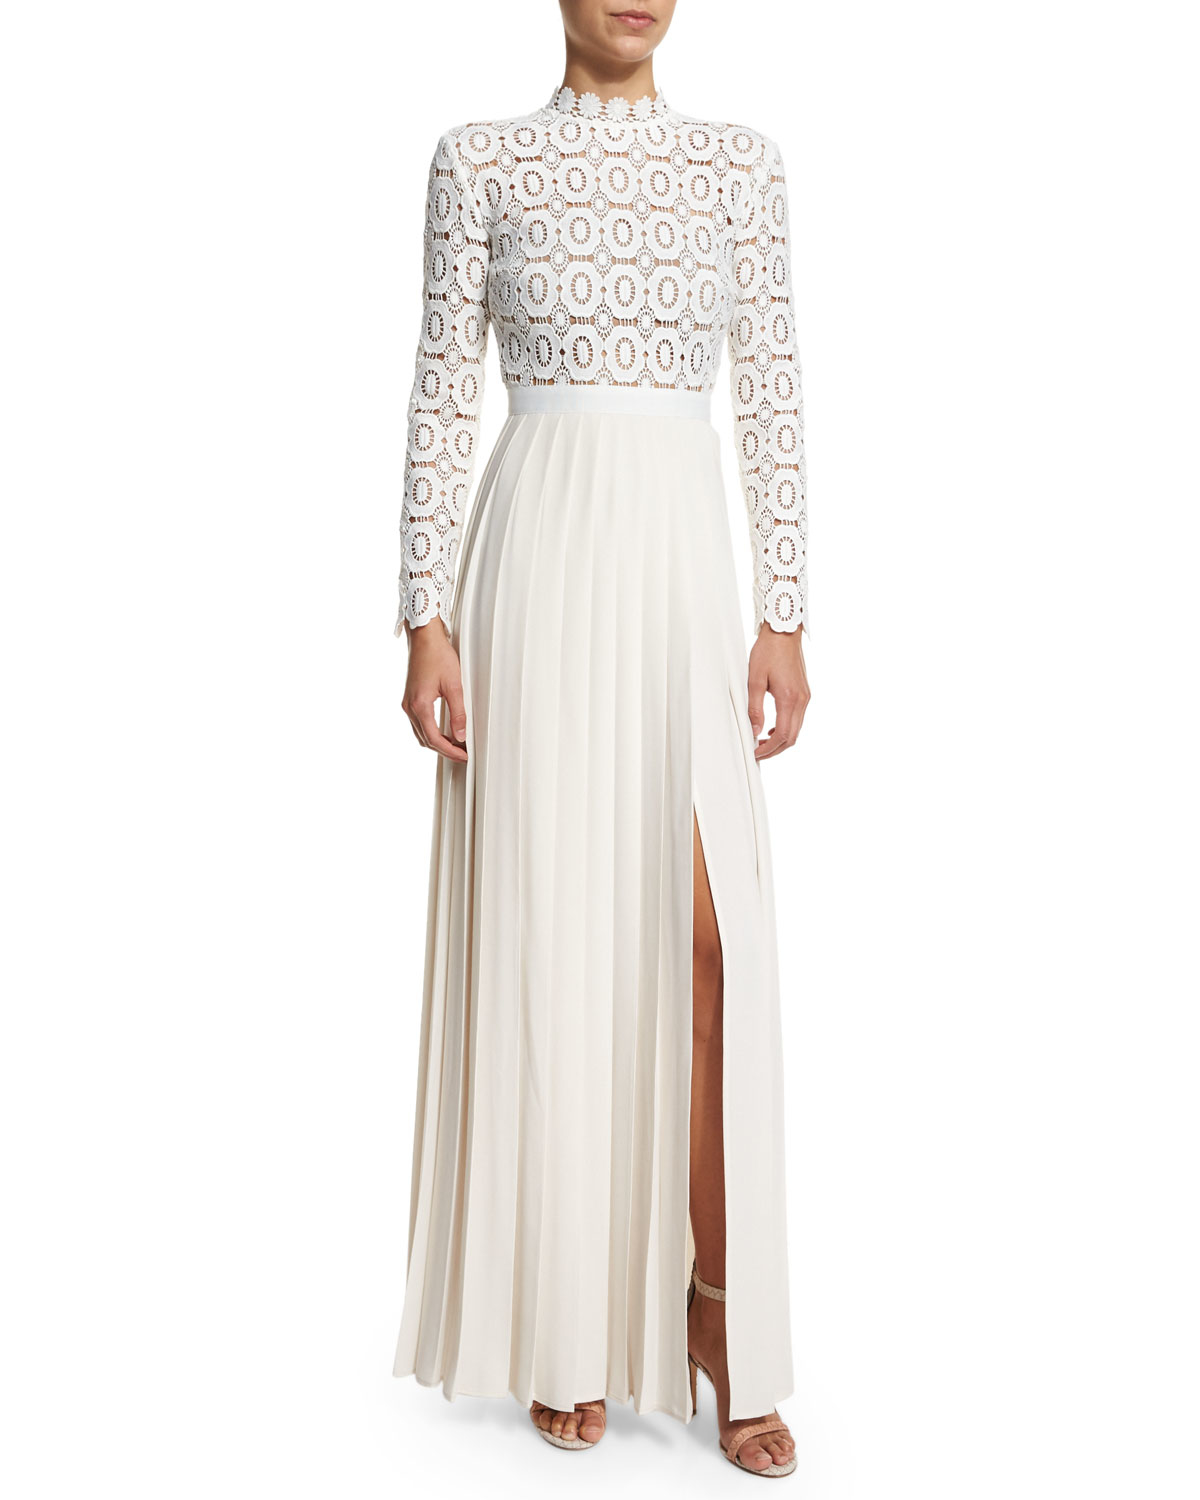 Lyst Self Portrait Lace and Crepe  Blend Gown in White